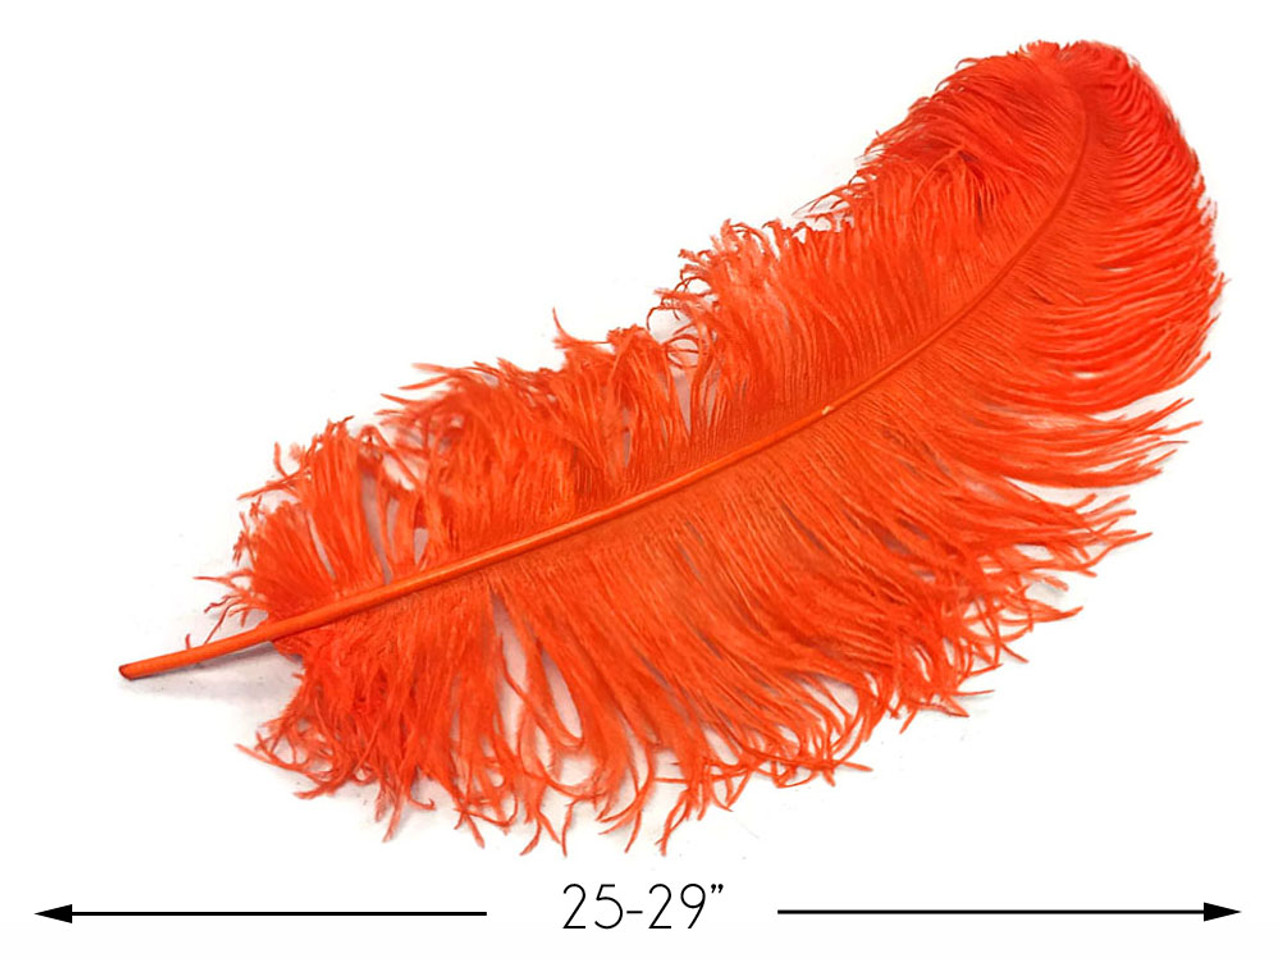 1/2 lb. - 25-29 Red Large Ostrich Wing Plume Wholesale Feathers (Bulk)